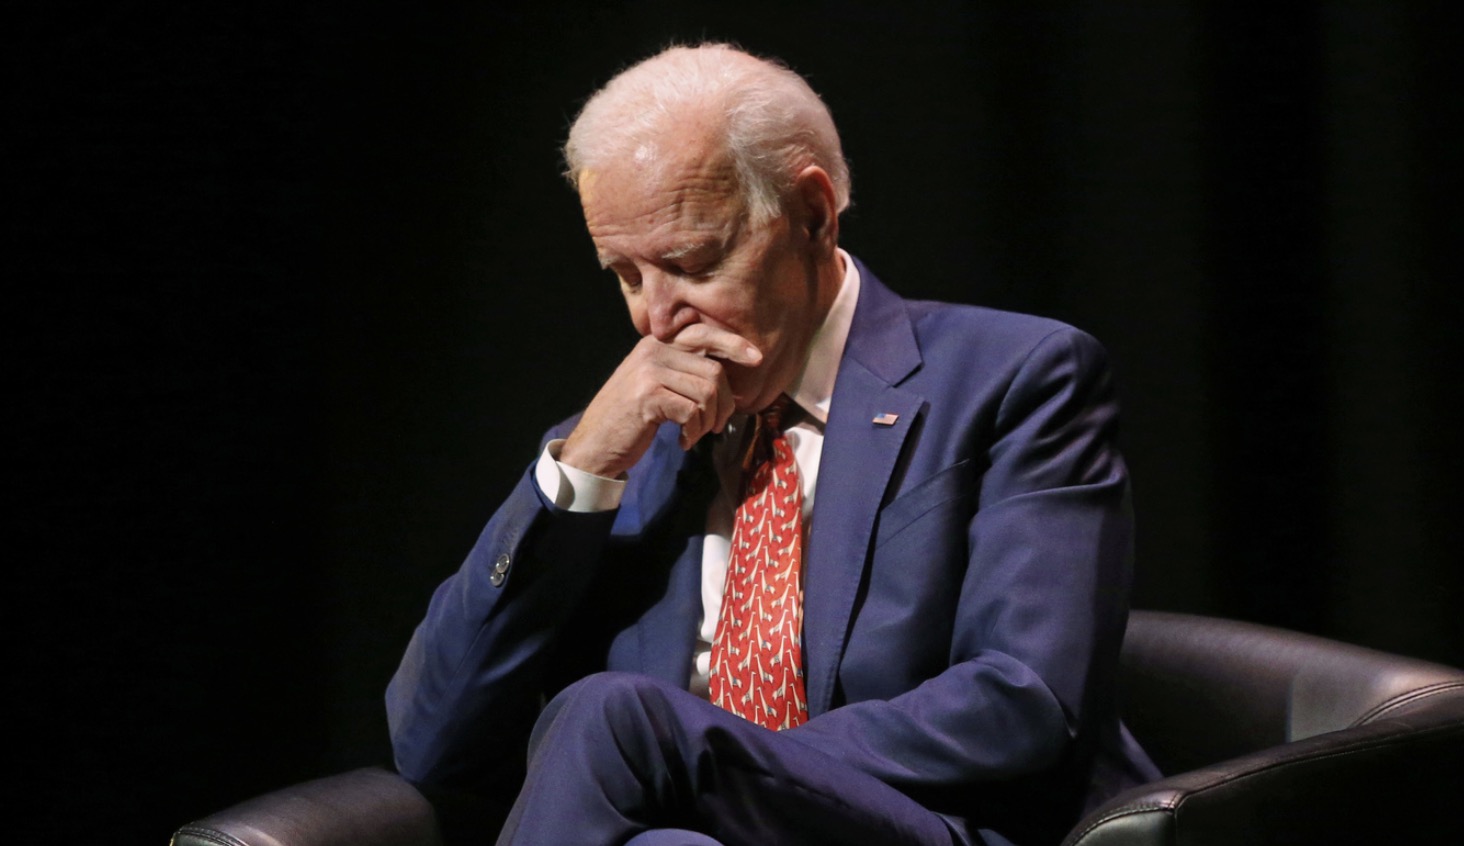 Ex-Clinton Adviser Tells Biden To Drop Out: 'Credible Rape Accusations Are Disqualifying' - Analyzing America